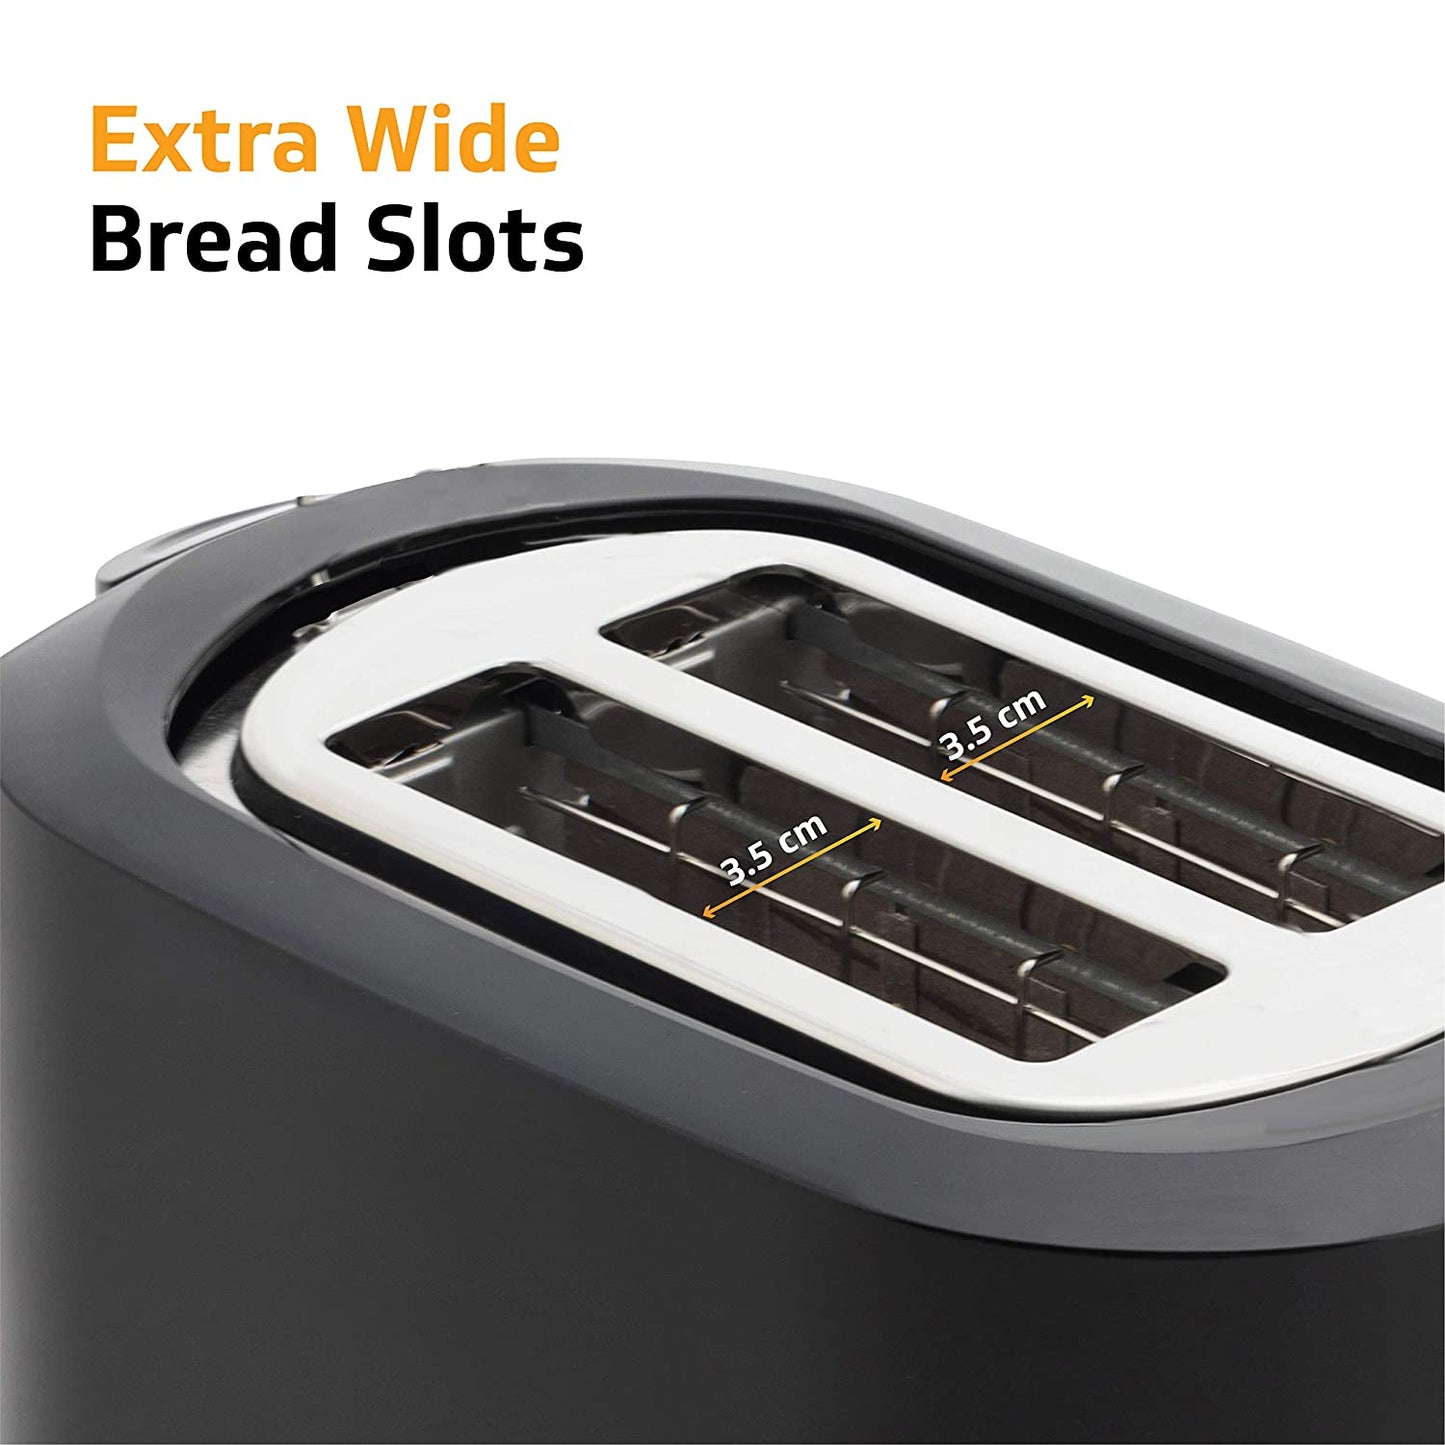 VT230 850 Watt 2-Slice Automatic Pop-Up Toaster with Bun Warmer, Variable Browning Levels and Defrost & Reheat Functions